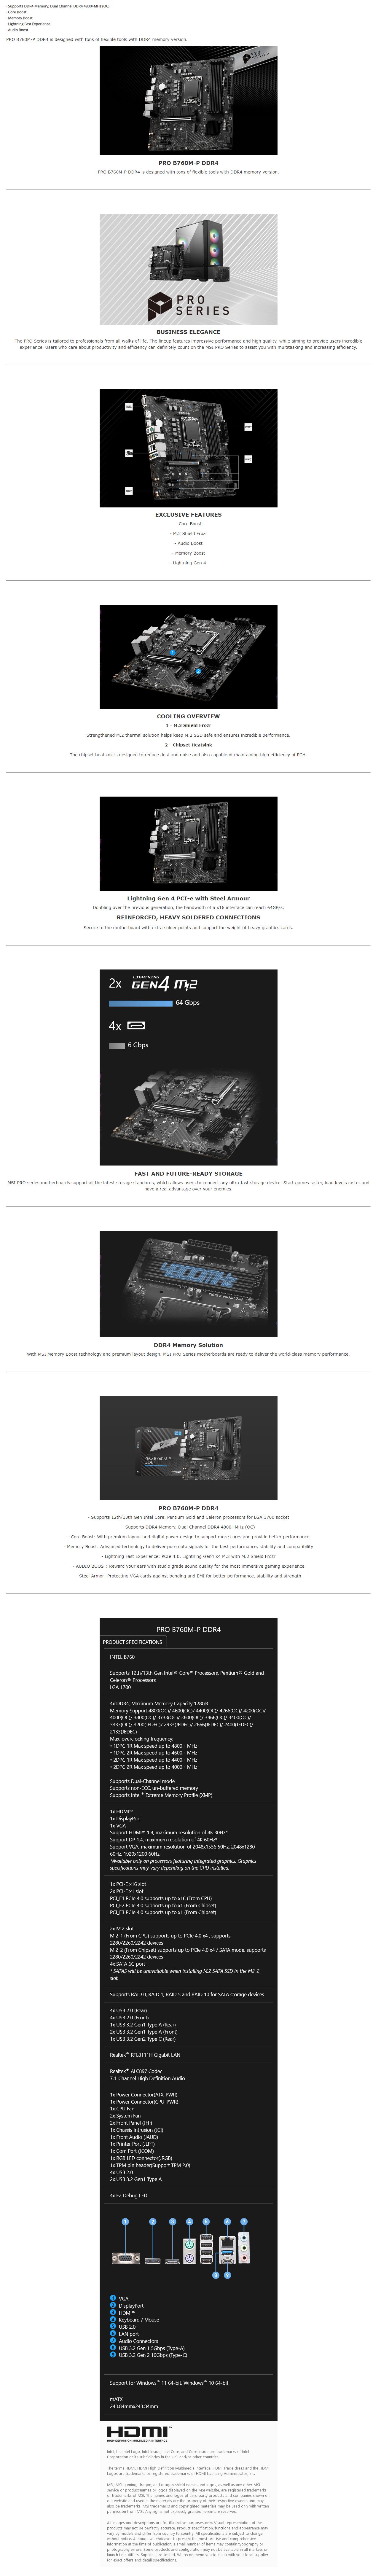 A large marketing image providing additional information about the product MSI PRO B760M-P DDR4 LGA1700 mATX Desktop Motherboard - Additional alt info not provided